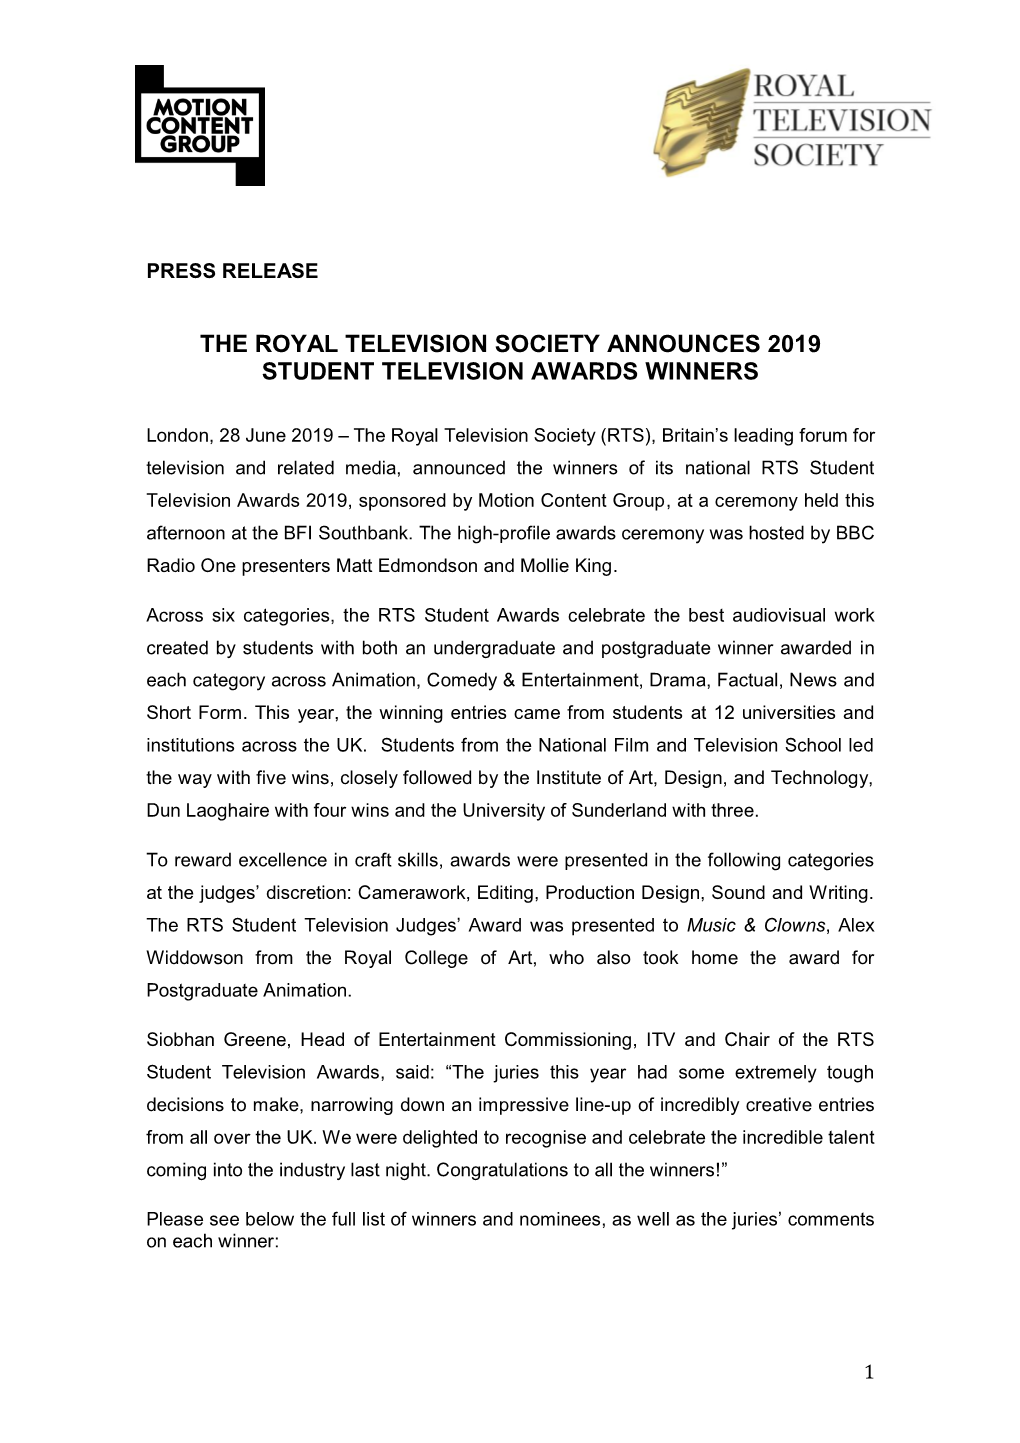 The Royal Television Society Announces 2019 Student Television Awards Winners